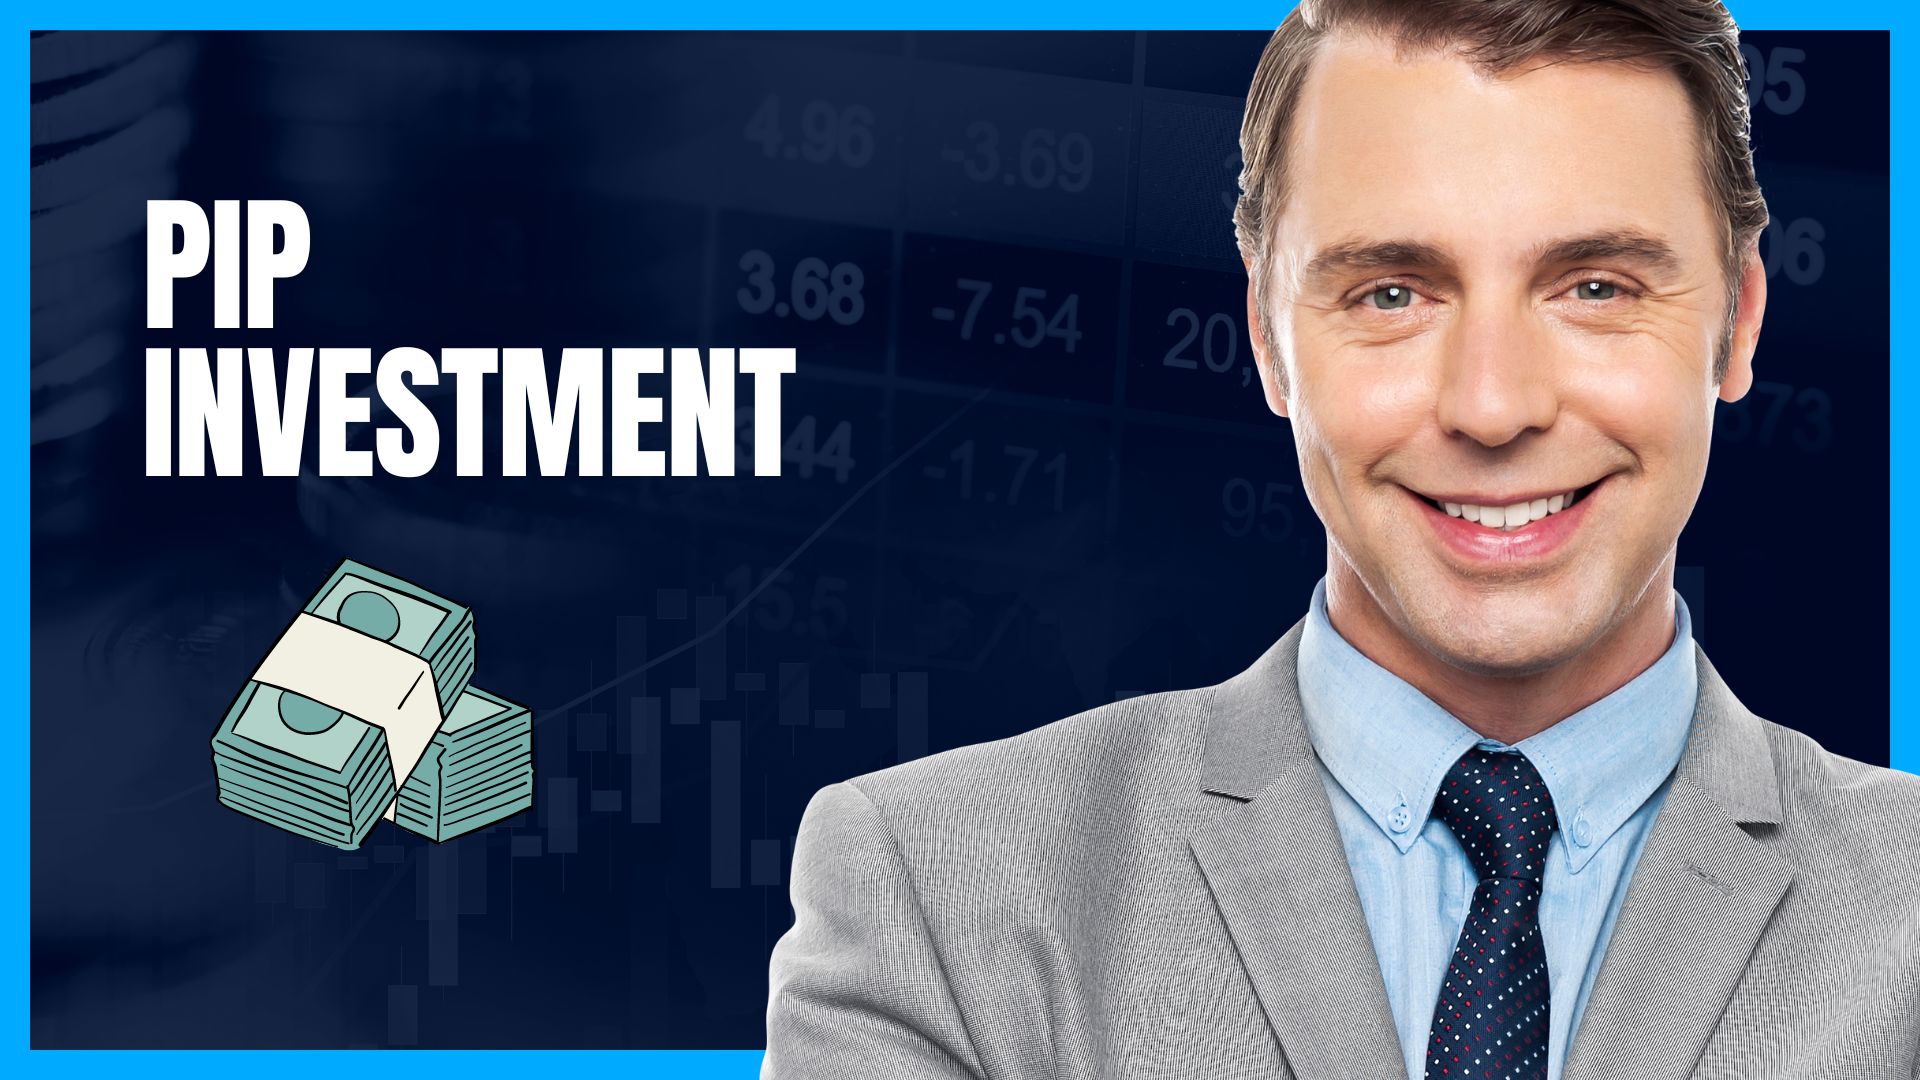 Pip Investment